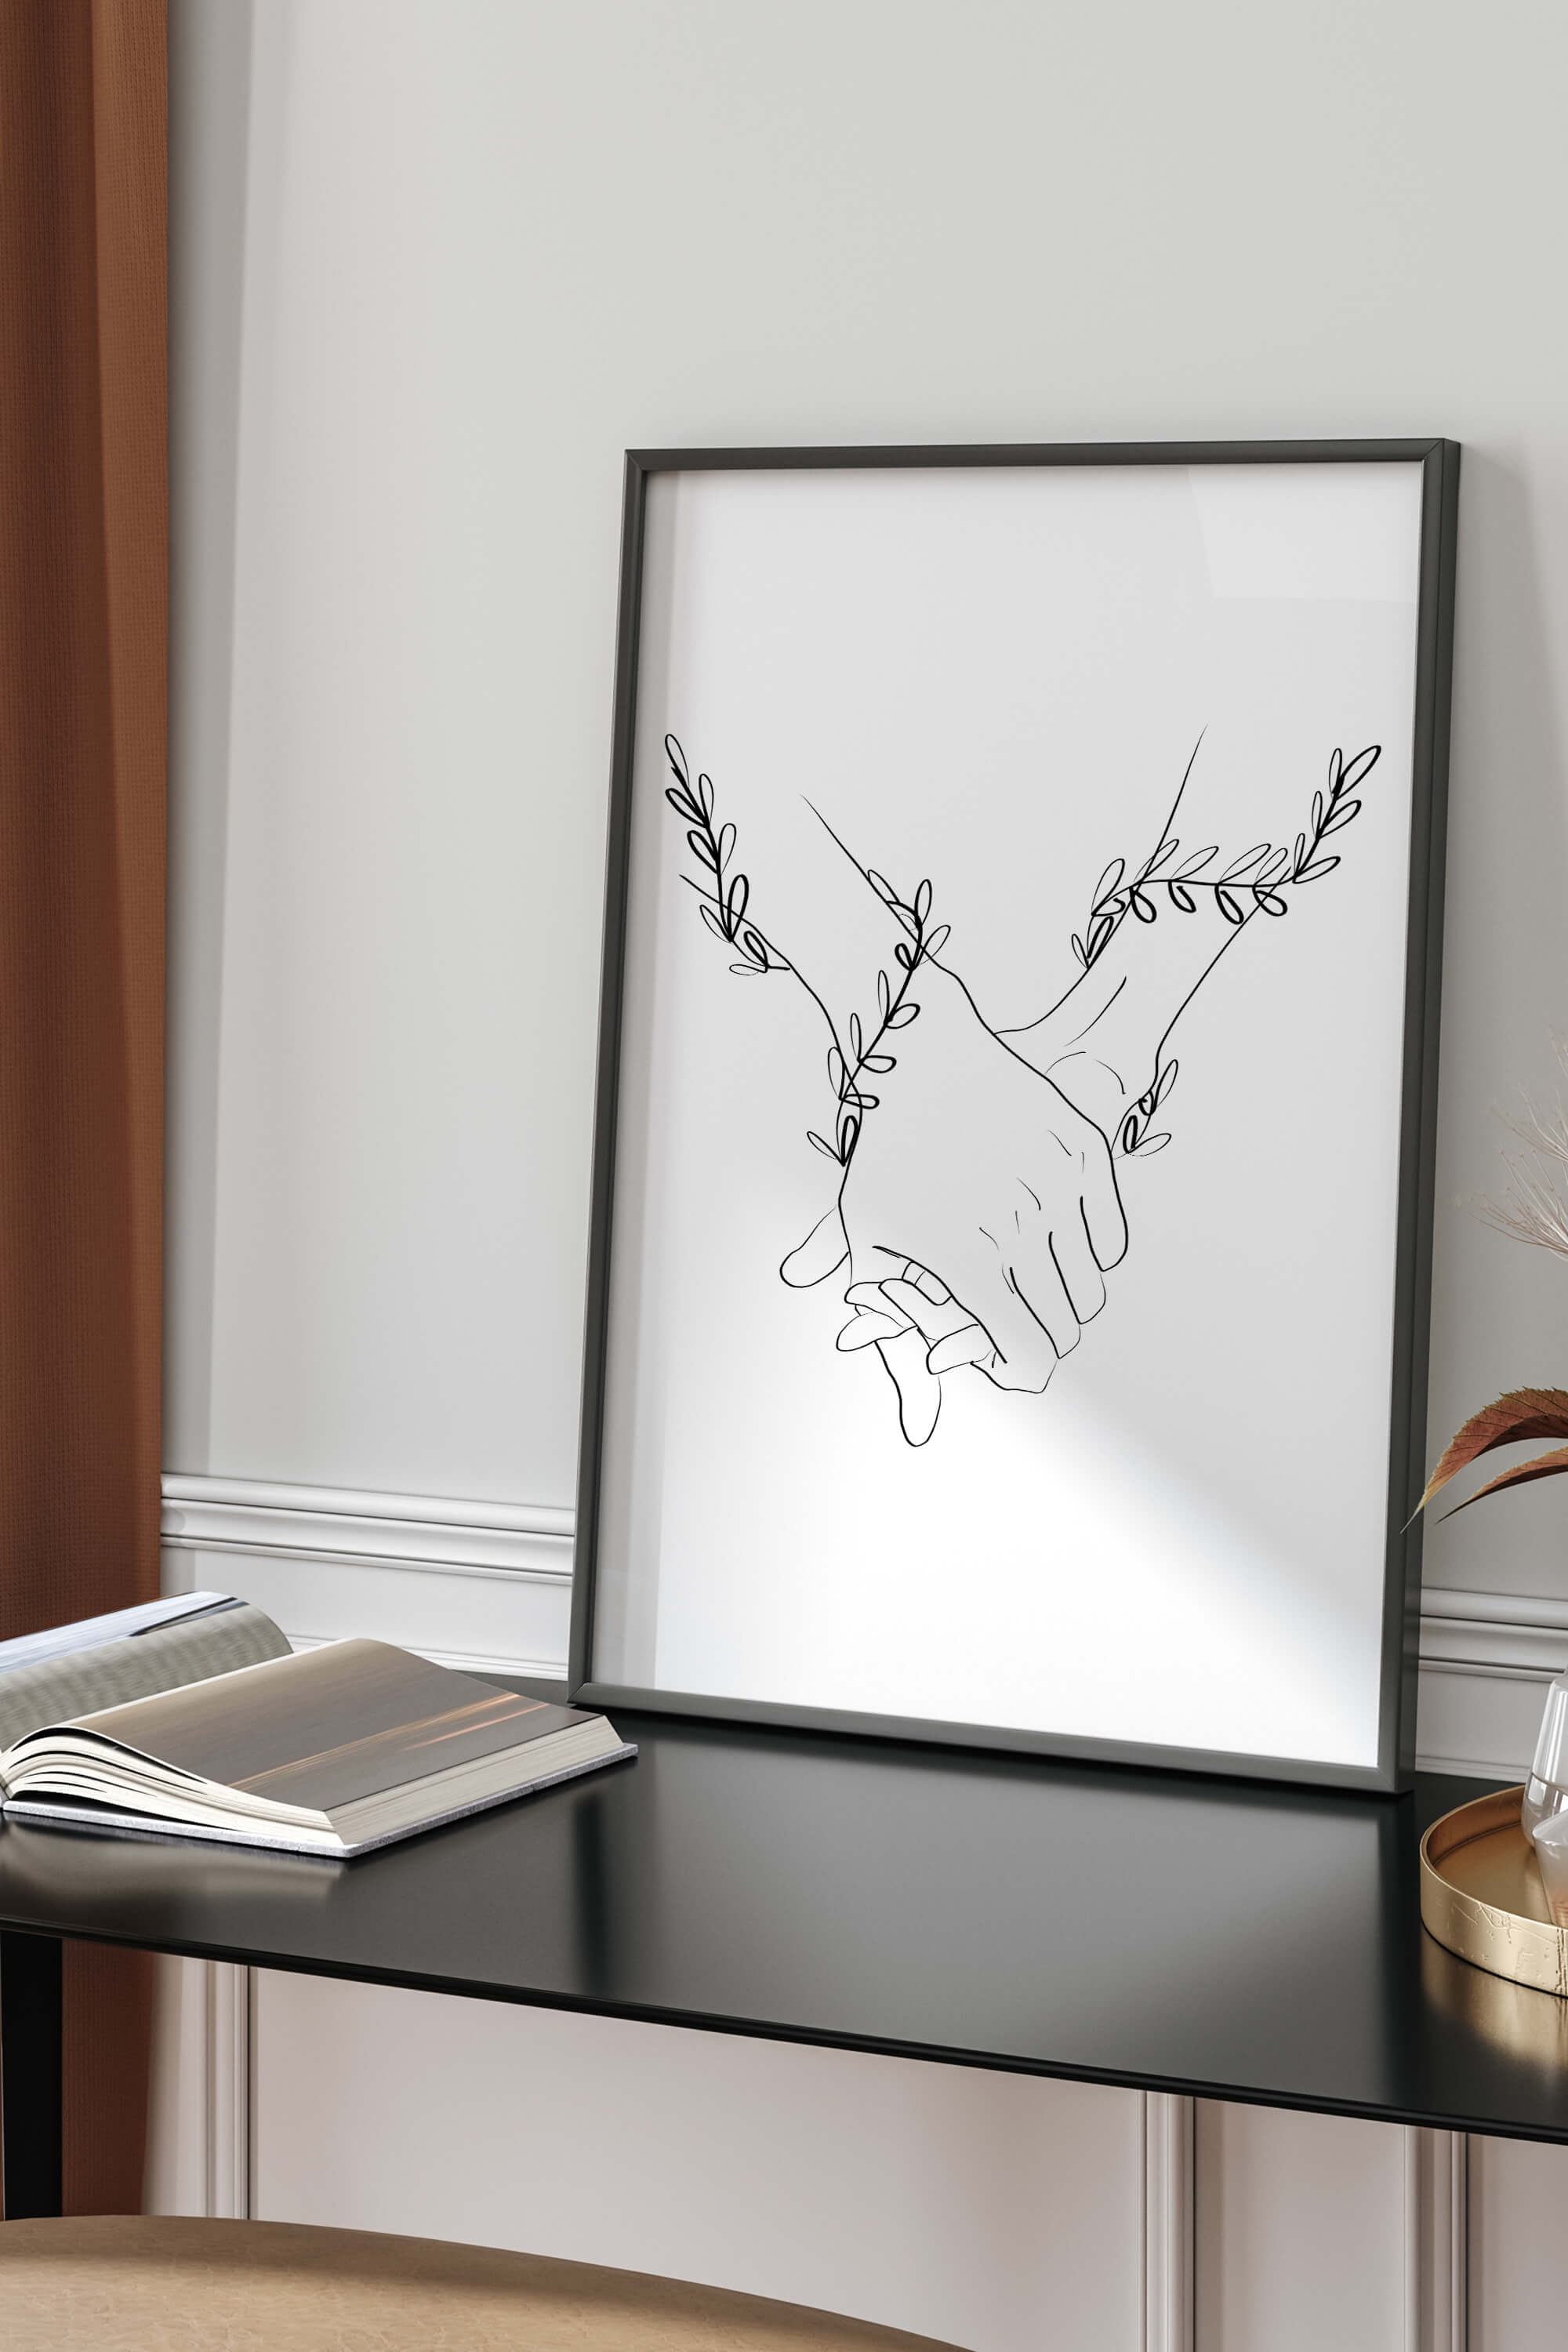 Tranquil depiction of a couple in harmony with nature. Minimalist love art print reflecting the serenity found in the outdoors.